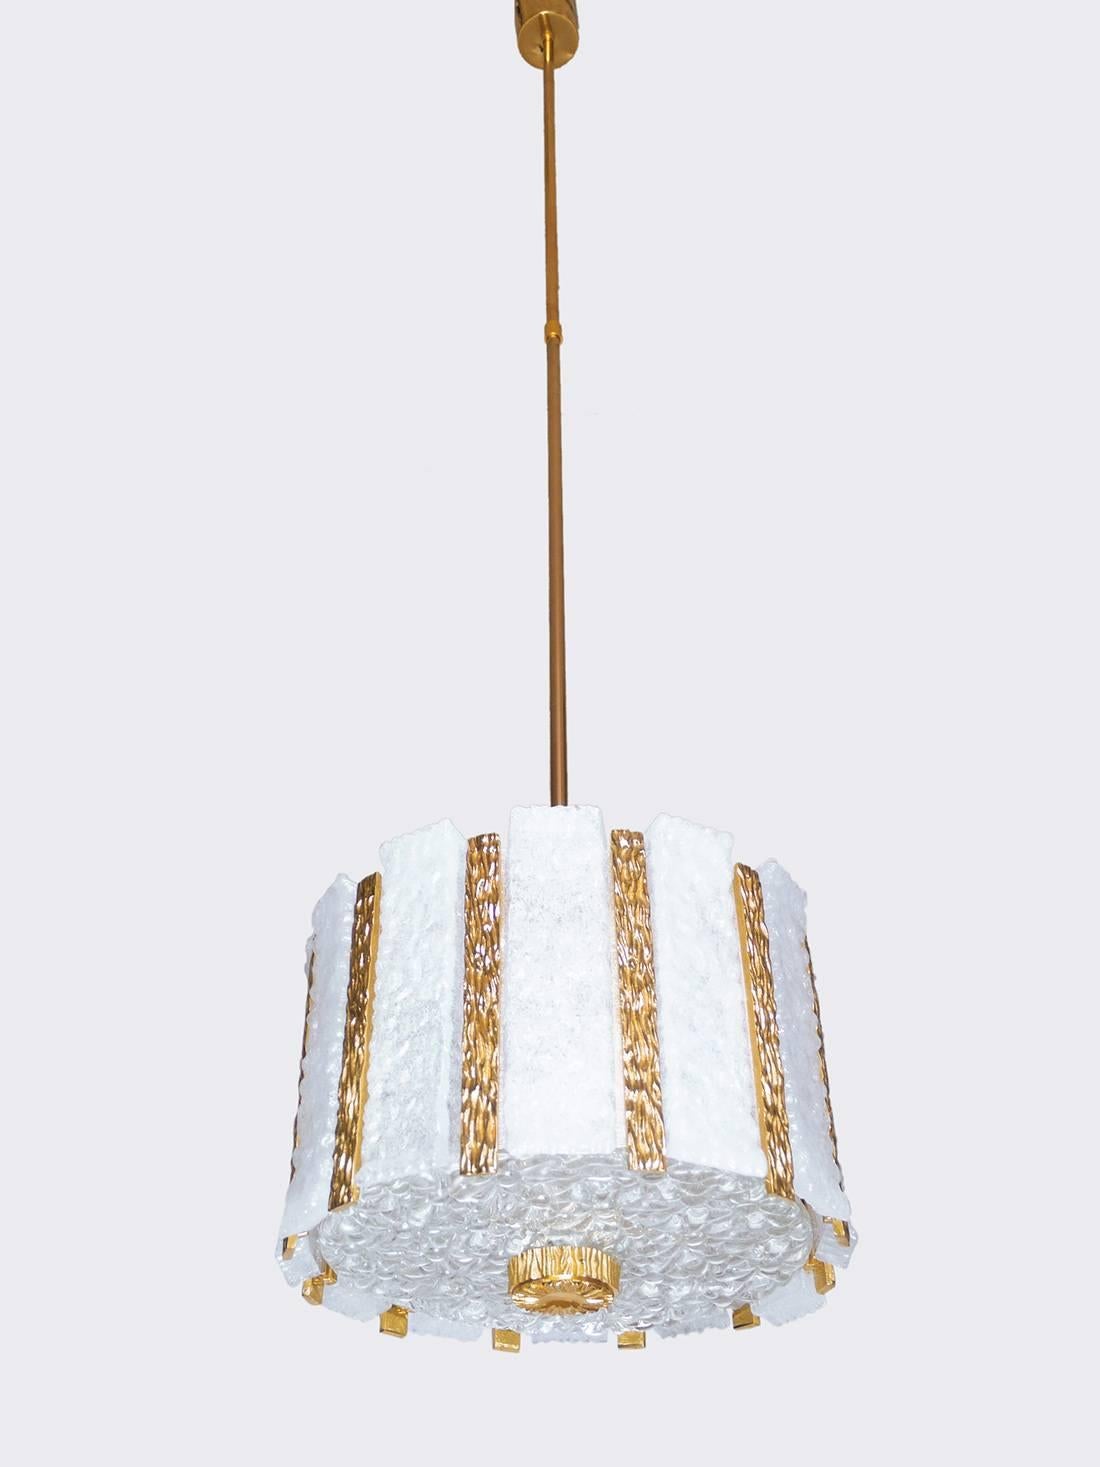 Gold-plated drum shaped chandelier with frosted glass panels on a gilt brass frame. Best of design from the 1960s by J.T. Kalmar, Austria.
The lamp takes 14 small E14 Edison base bulbs. 

The lamp has been tested with US American light bulbs under